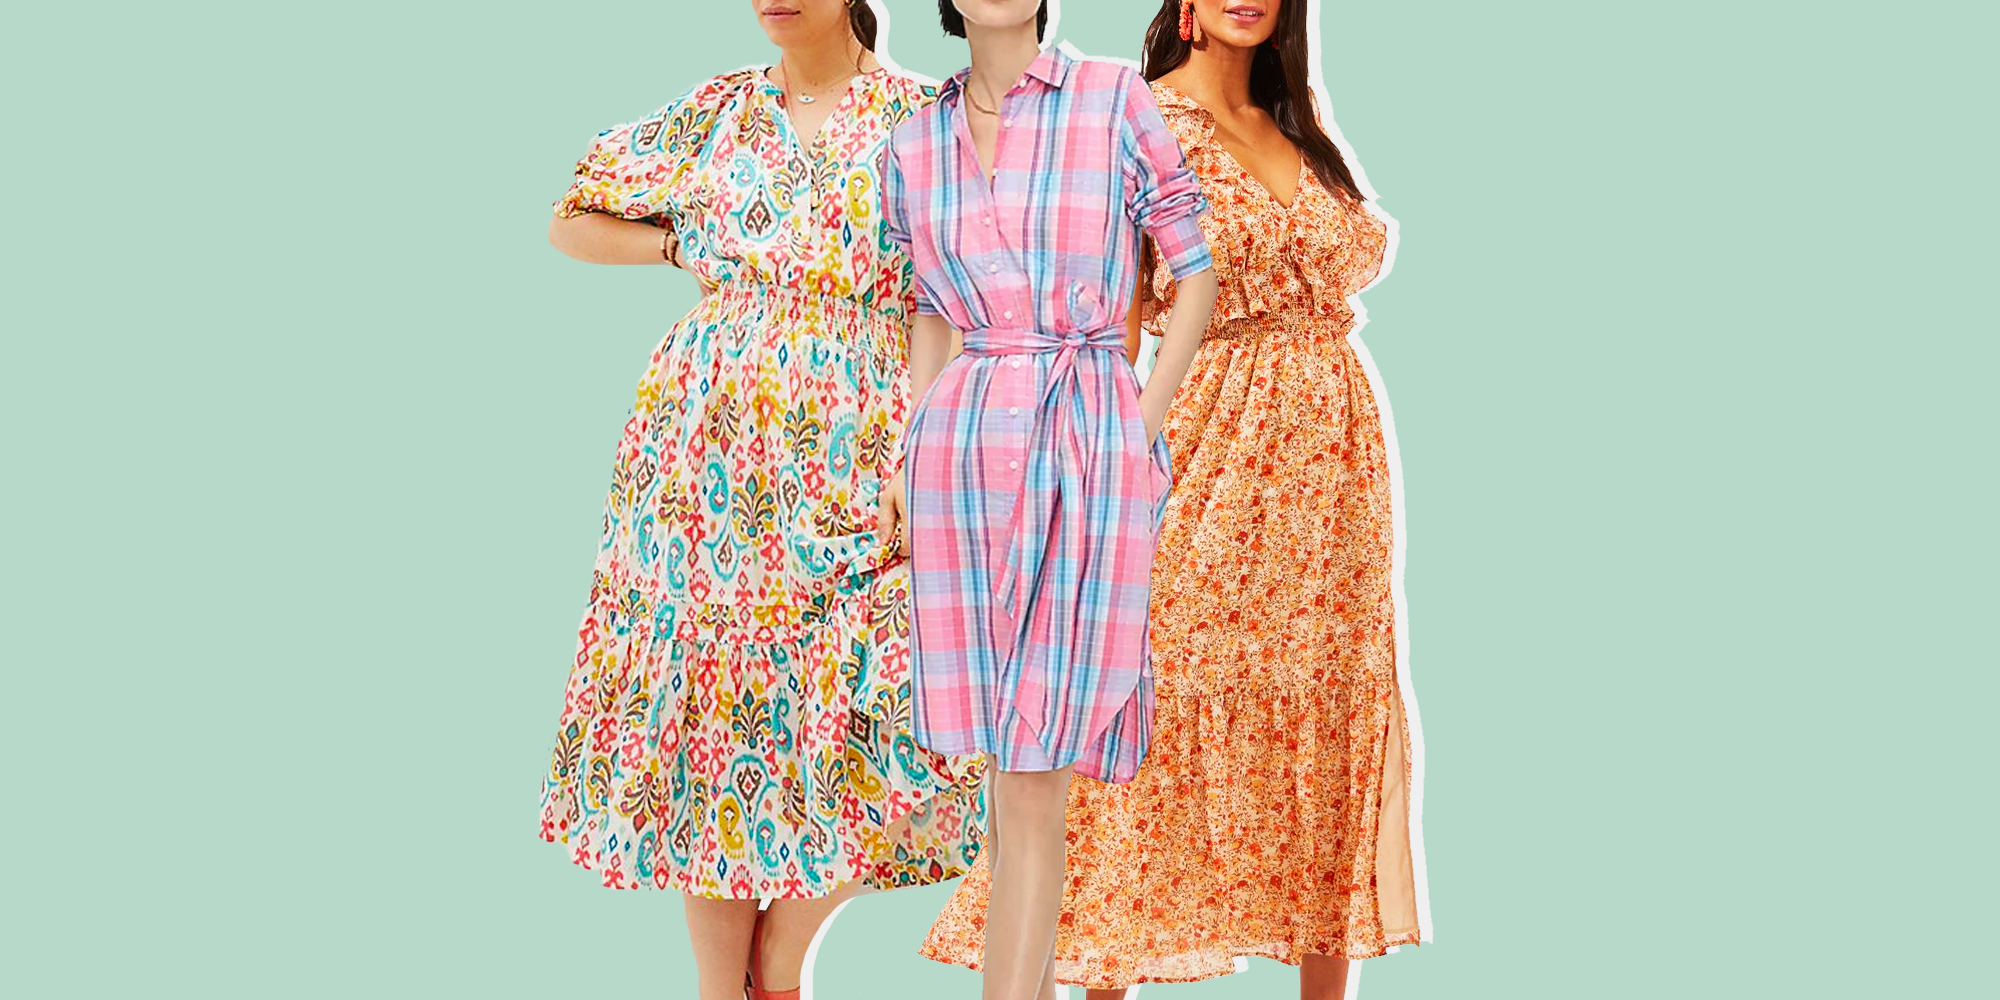 Summer dresses with sleeves 2021